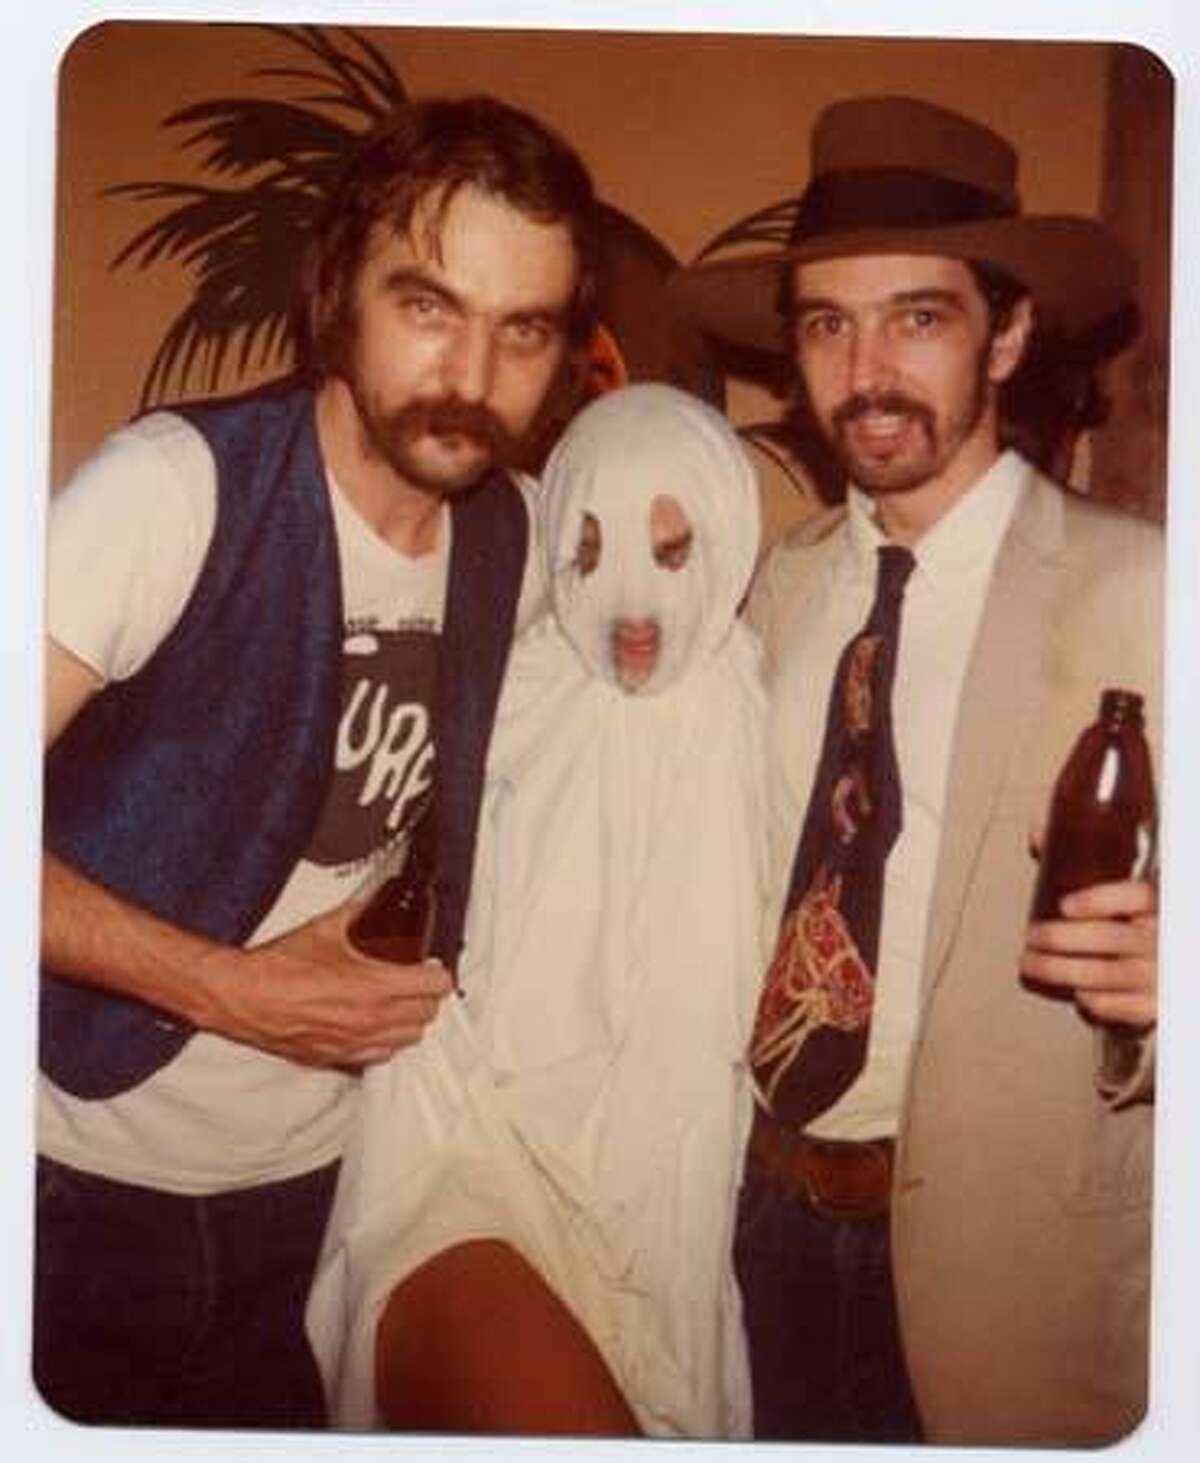 Blaze Foley with Gurf Morlix and unknown ghost on Halloween. Gurf and Blaze dressed up as each other.